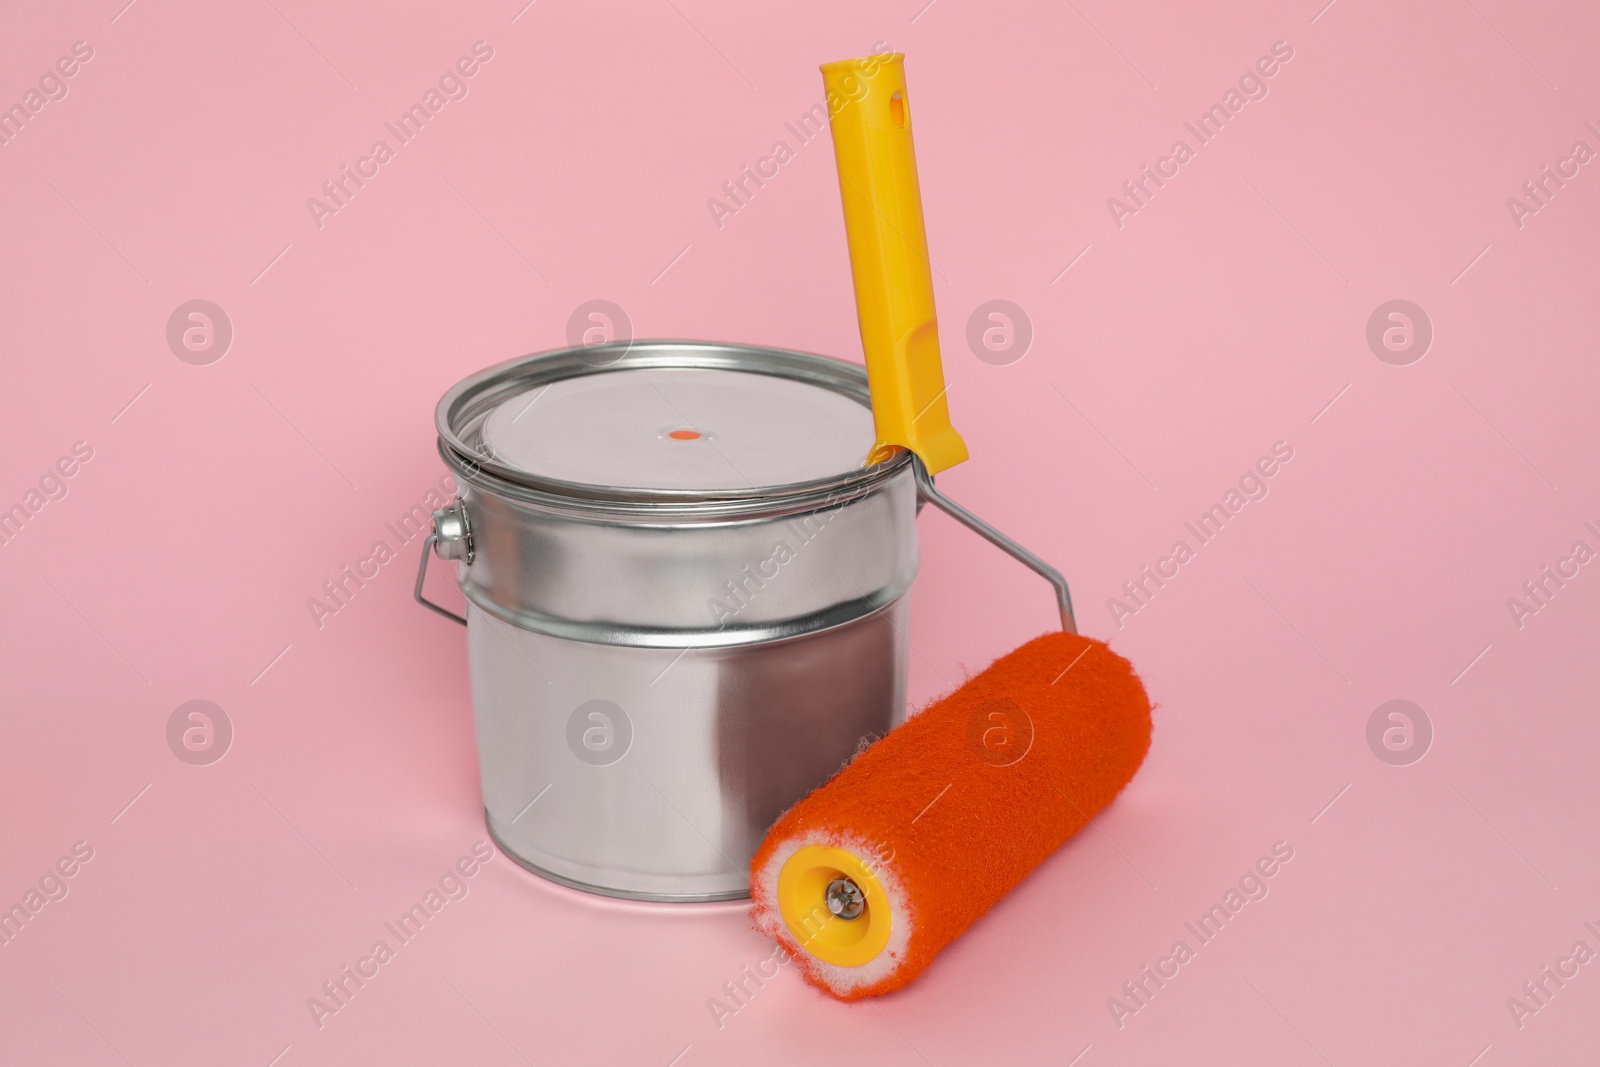 Photo of Can of orange paint and roller on pink background